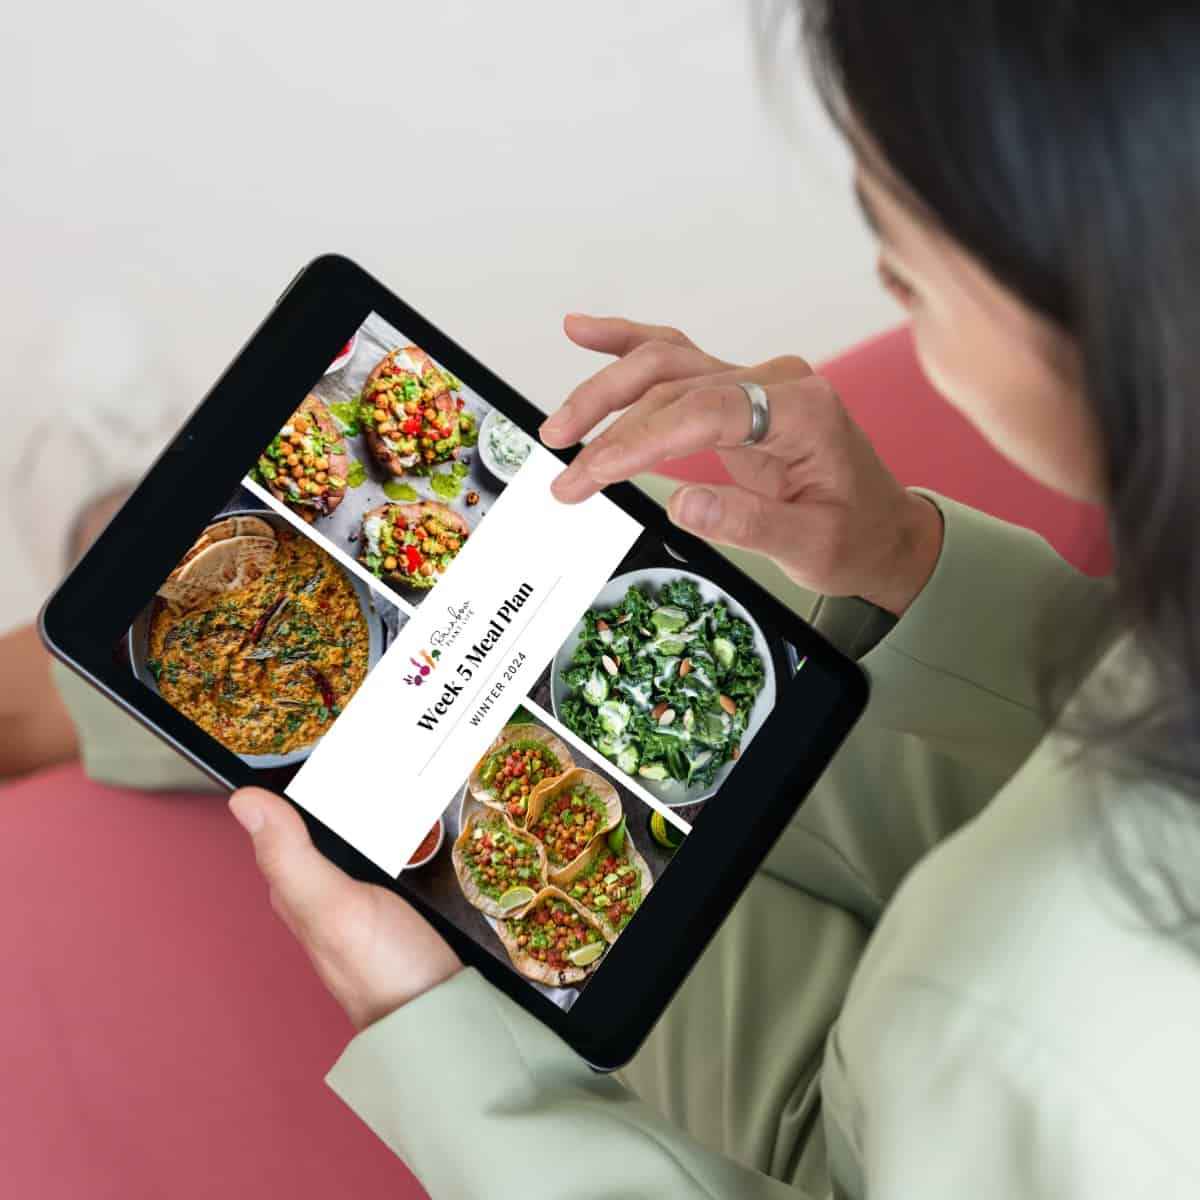 woman looking at meal plans on ipad while sitting down.